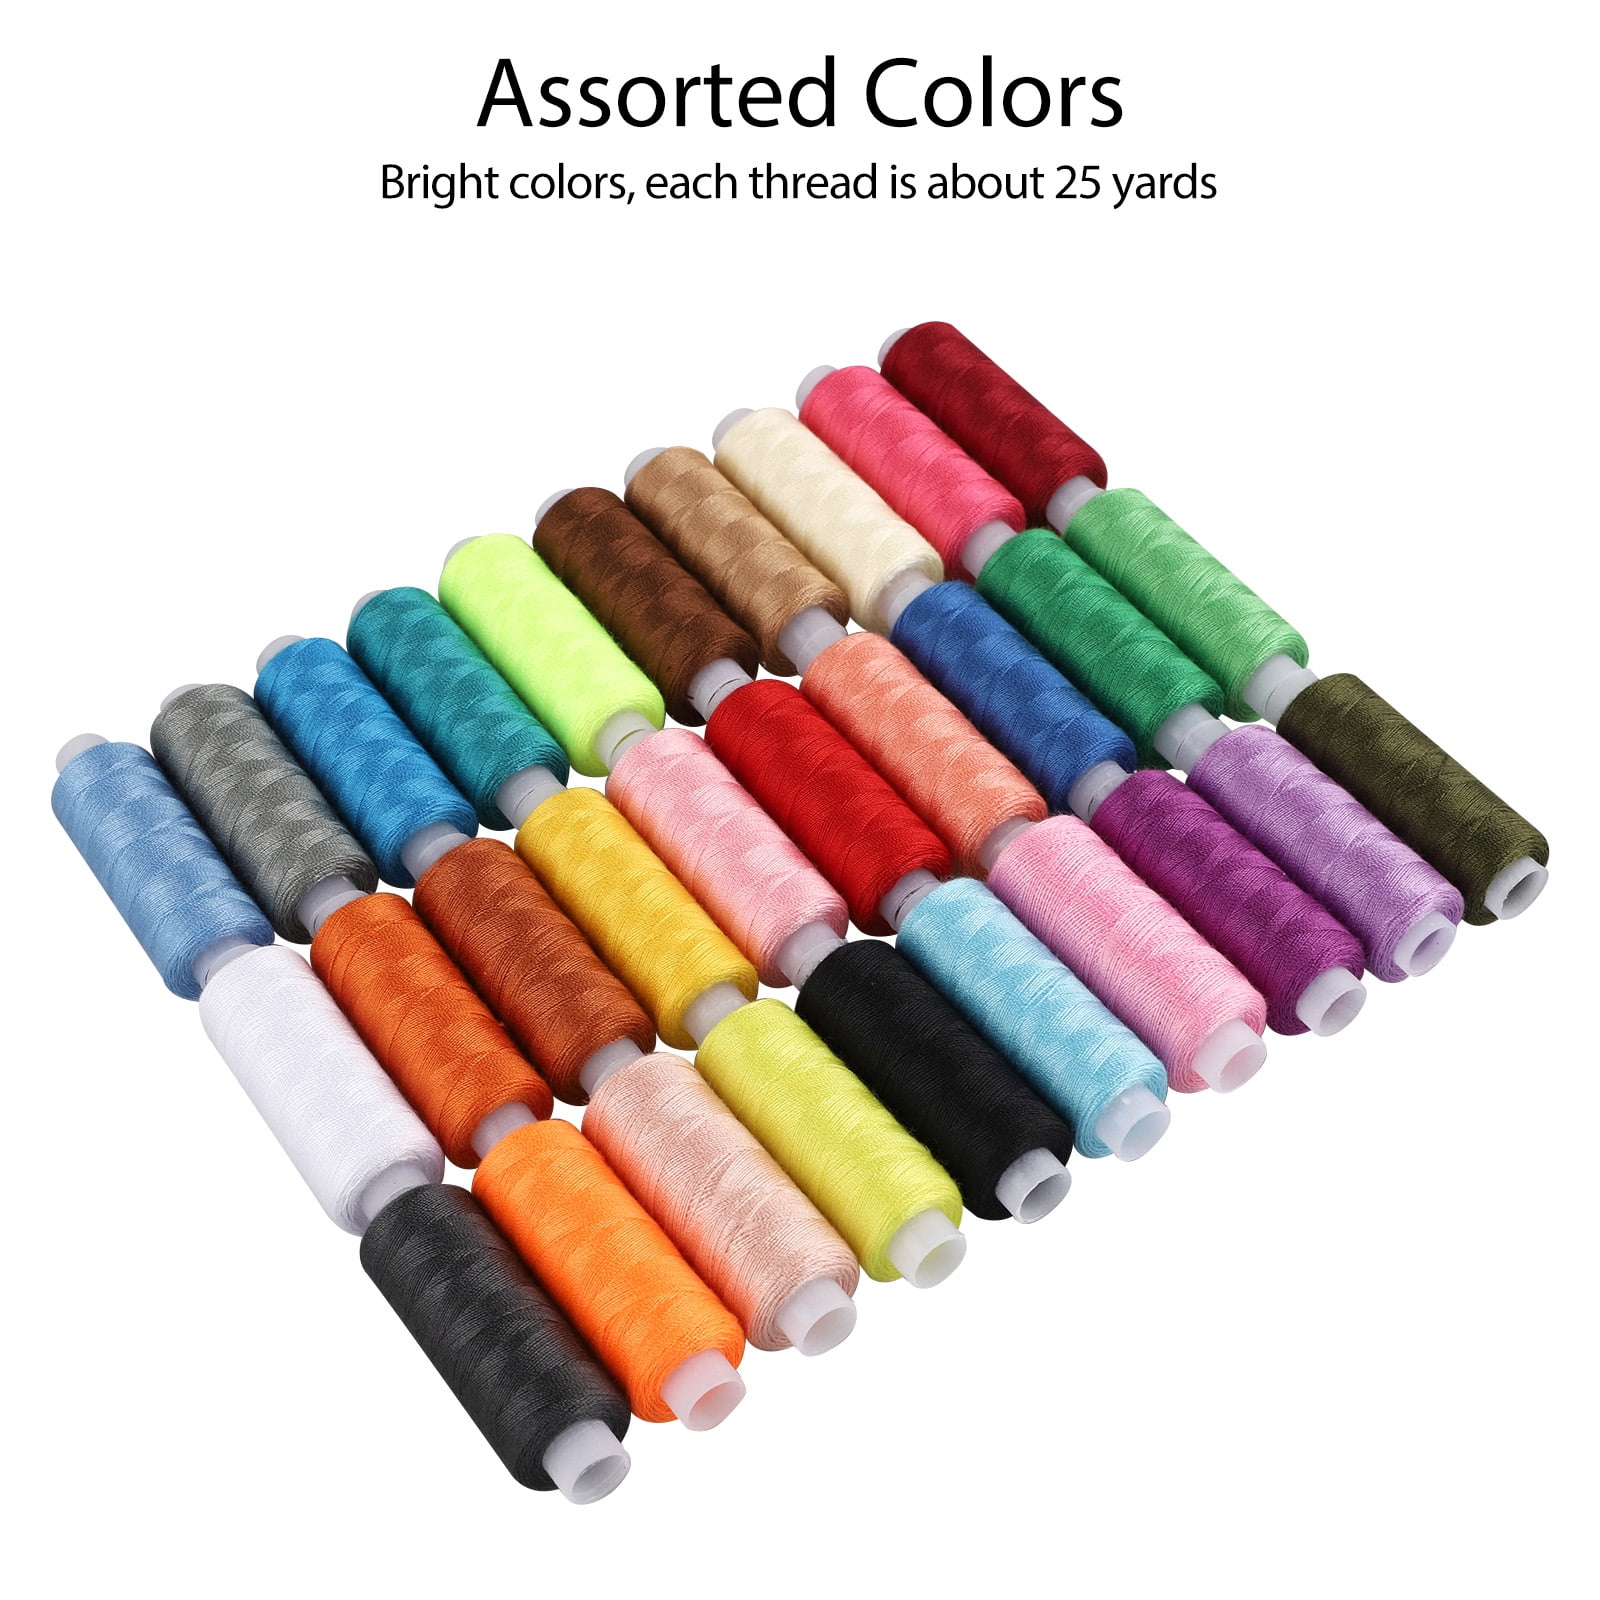 Casewin Sewing Thread Assortment Coil 30 Color 250 Yards Each Polyester  Thread Sewing Kit All Purpose Polyester Thread for Hand and Machine Sewing